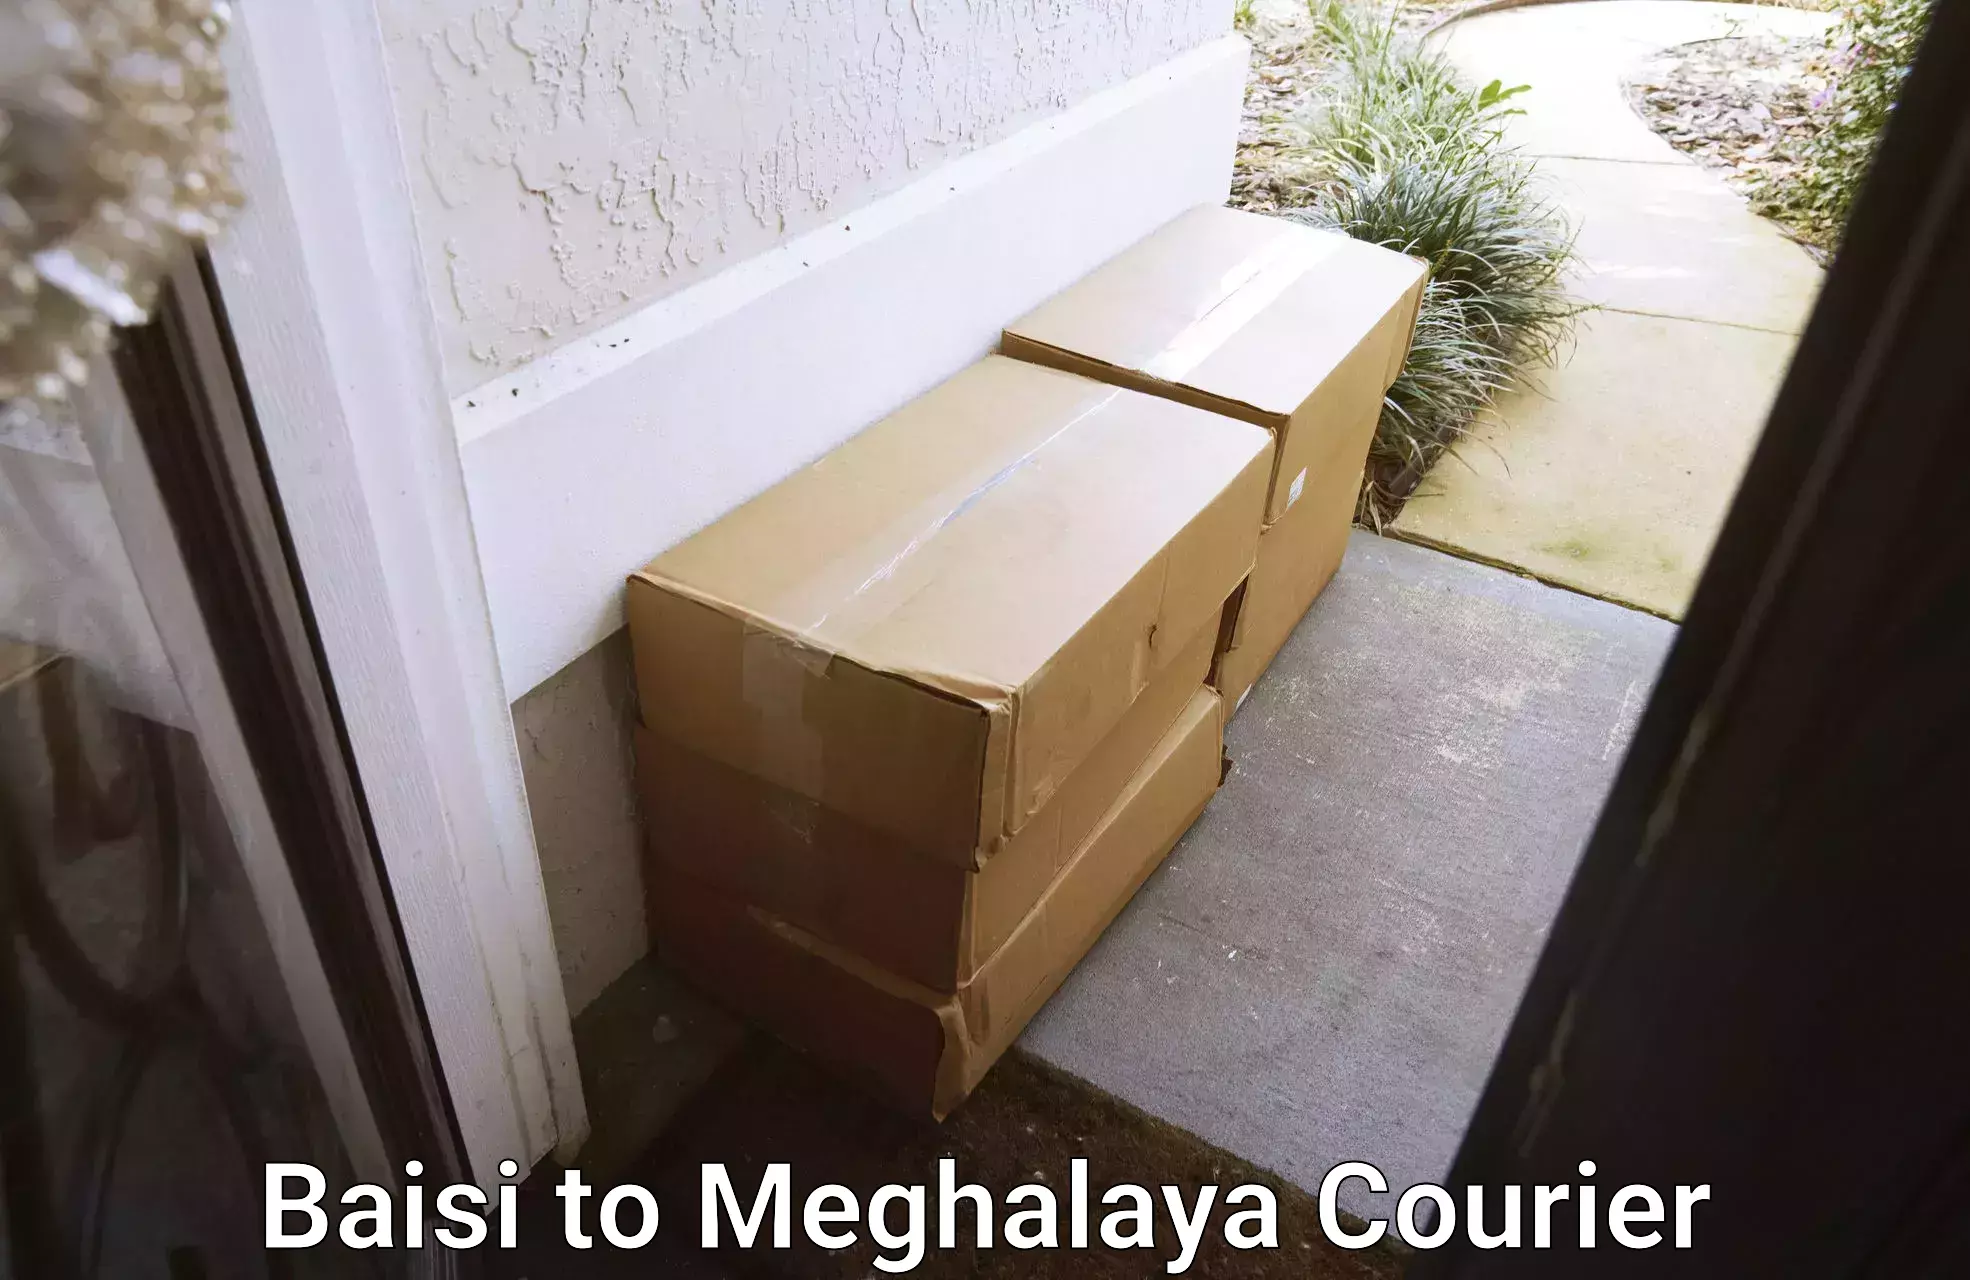 Moving and packing experts Baisi to Meghalaya